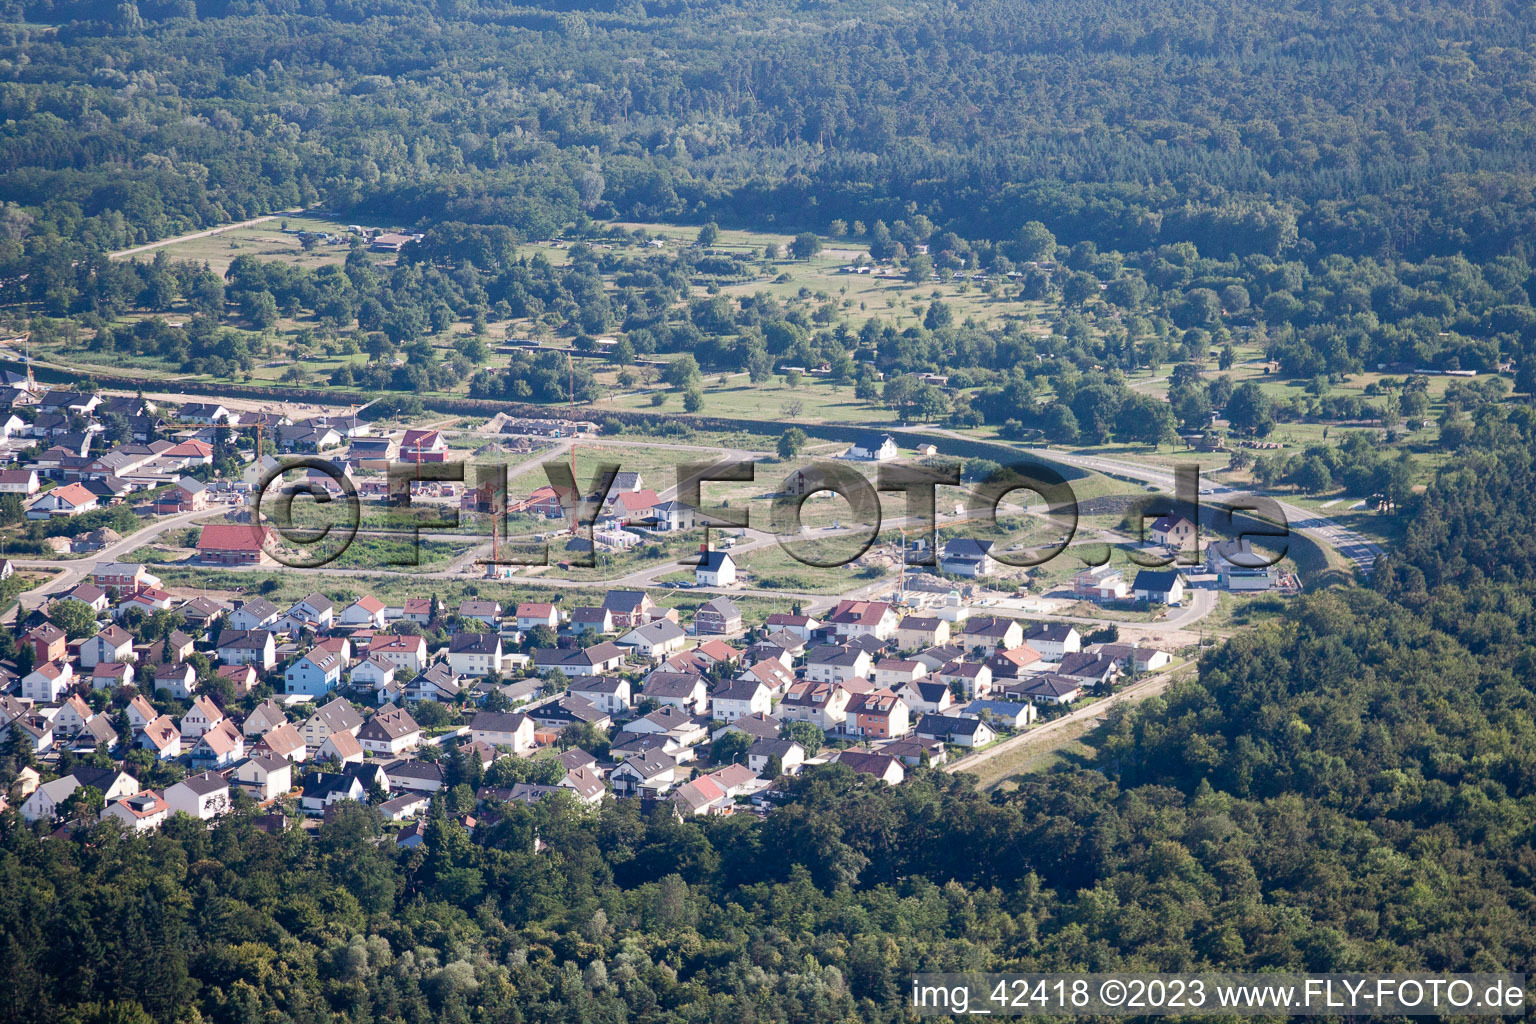 Aerial photograpy of New development area west in Jockgrim in the state Rhineland-Palatinate, Germany